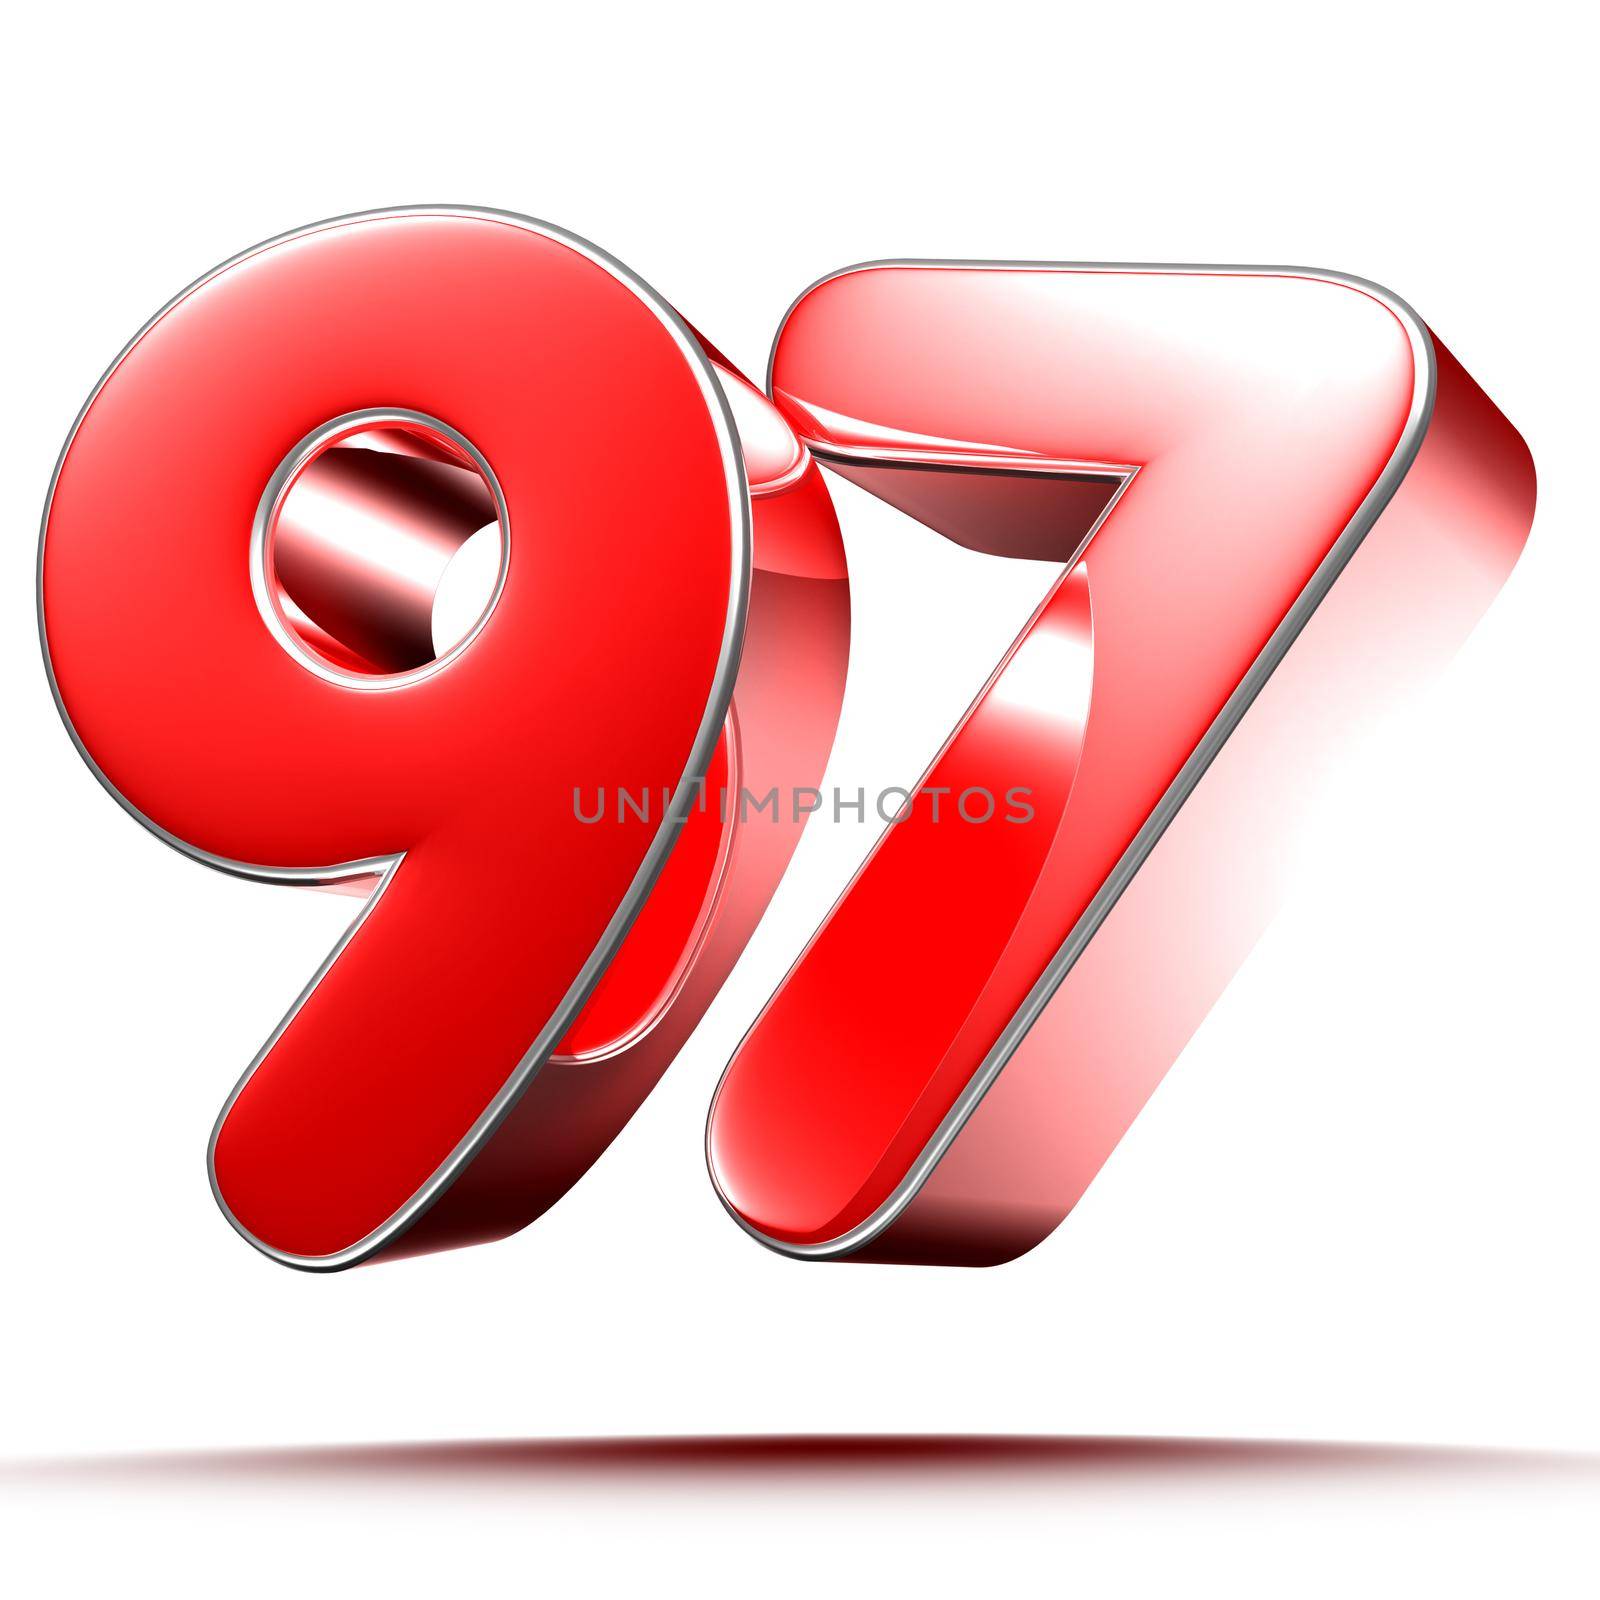 Red numbers 97 on white background 3D rendering with clipping path.